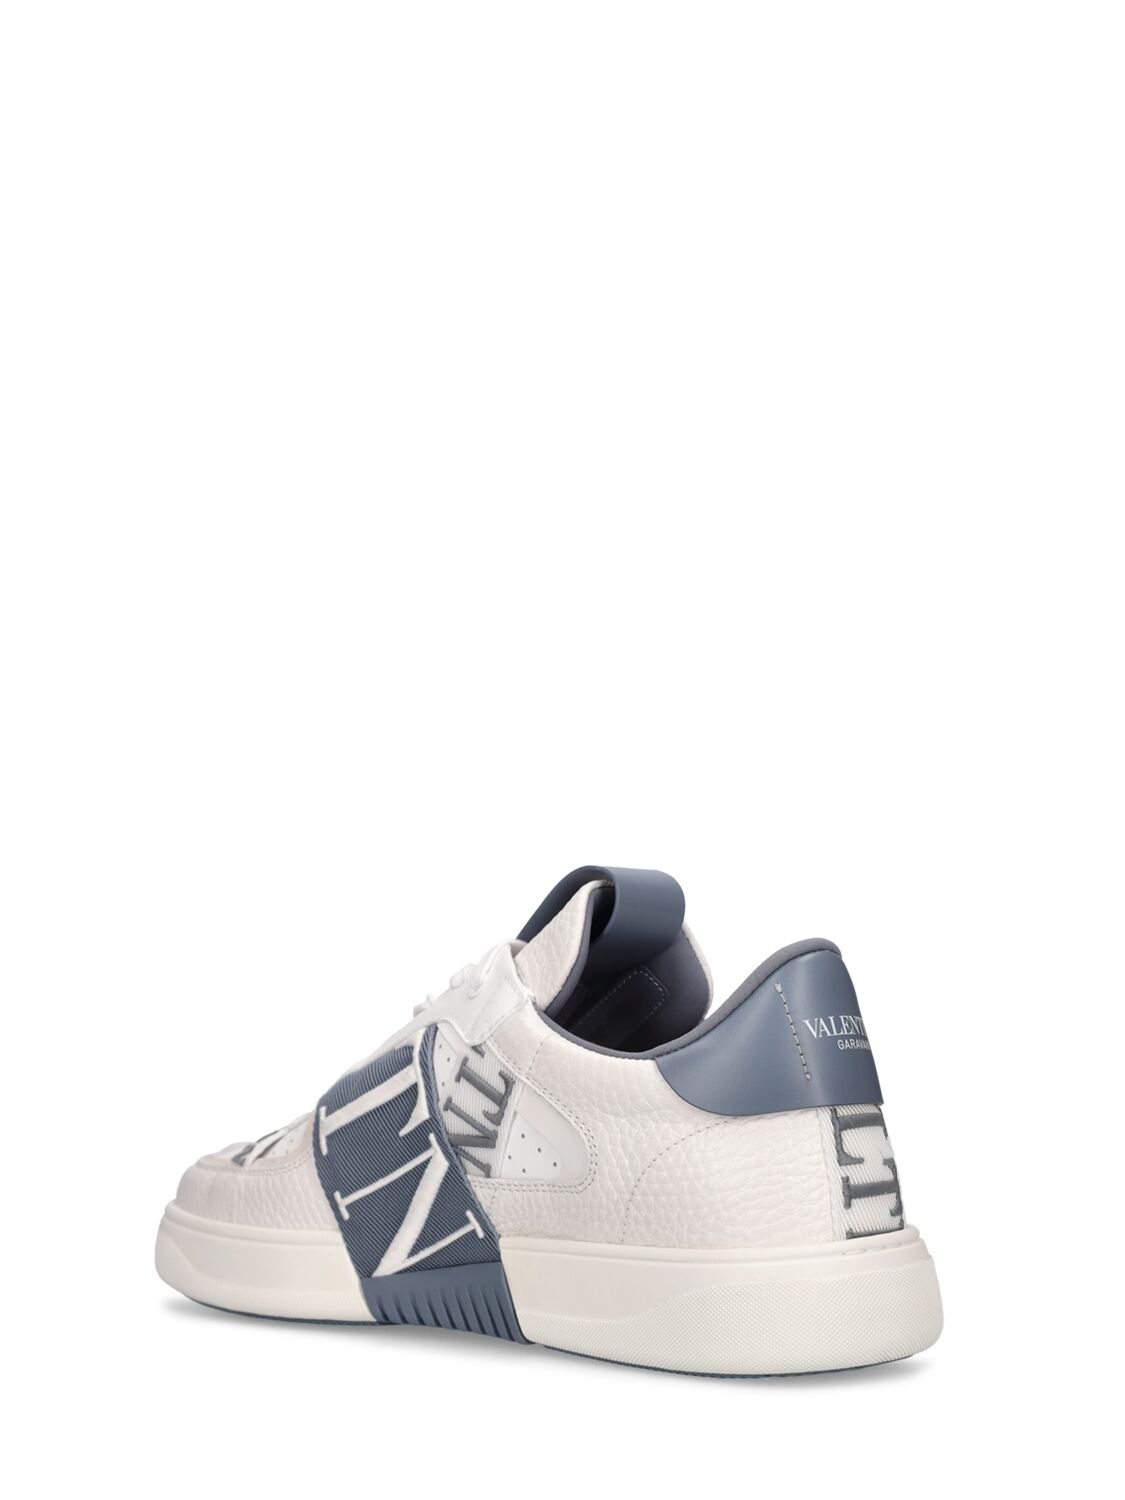 Shop Valentino Vl7n Leather Low Top Sneakers In White,blue